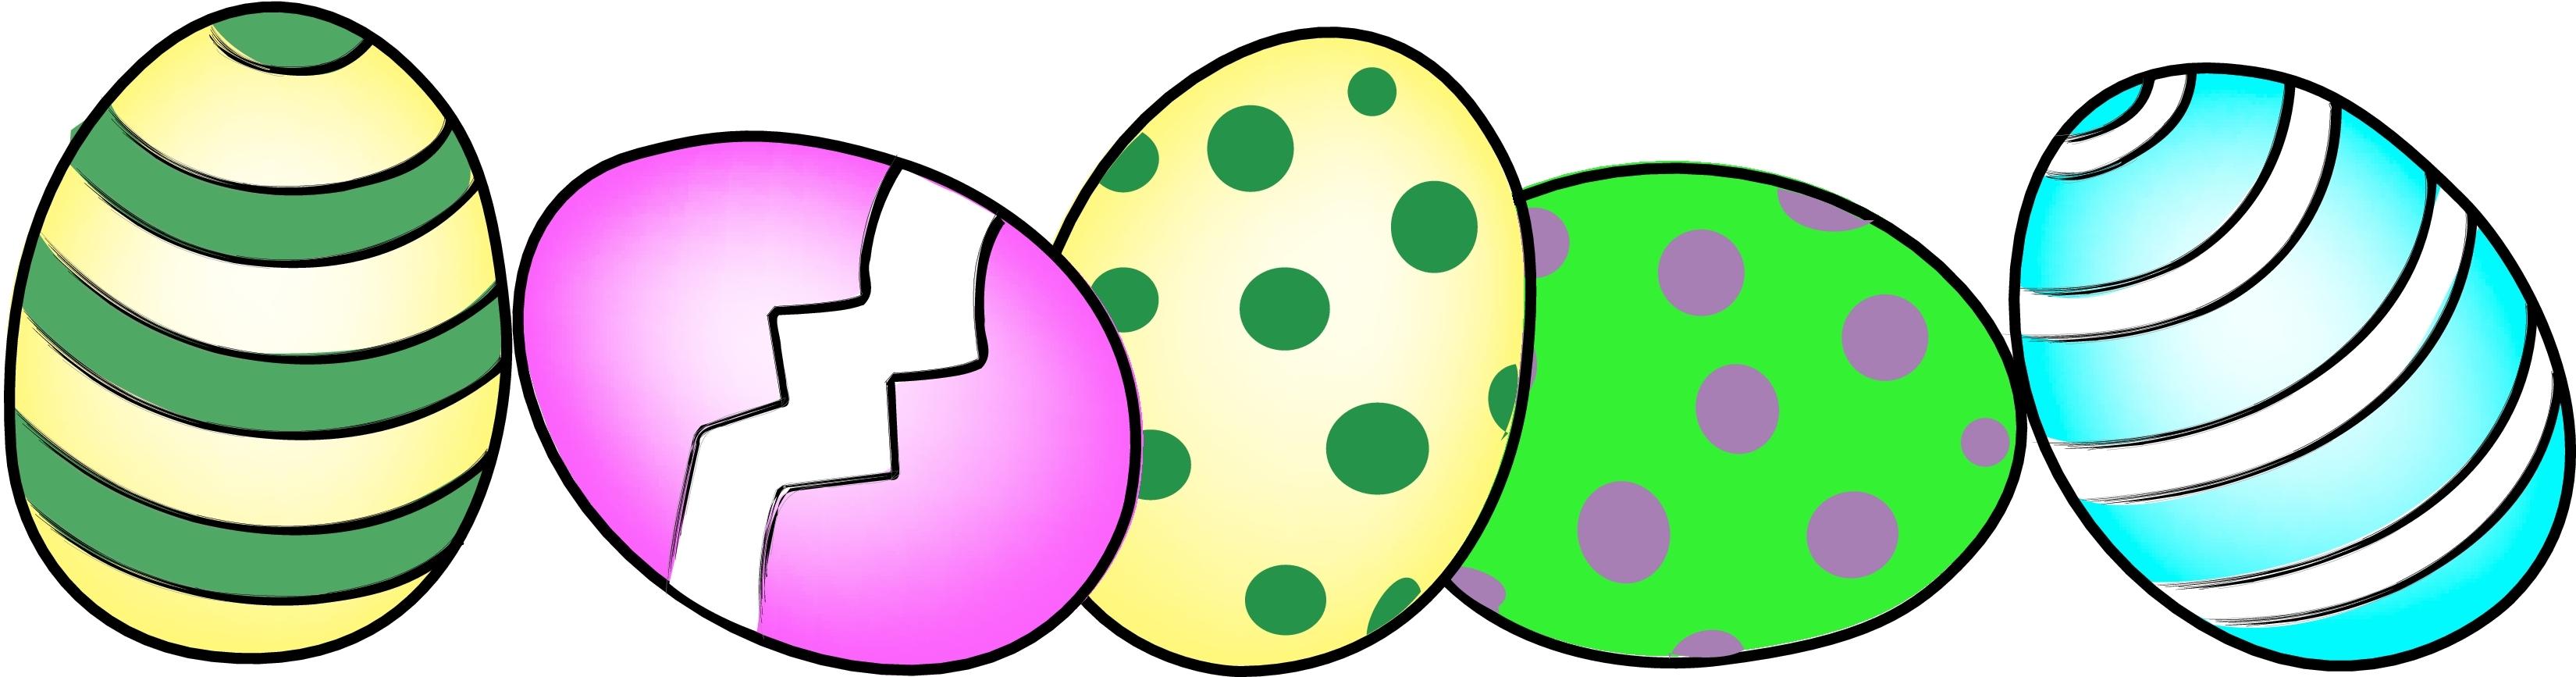 Happy images pics photos. Easter clipart festival